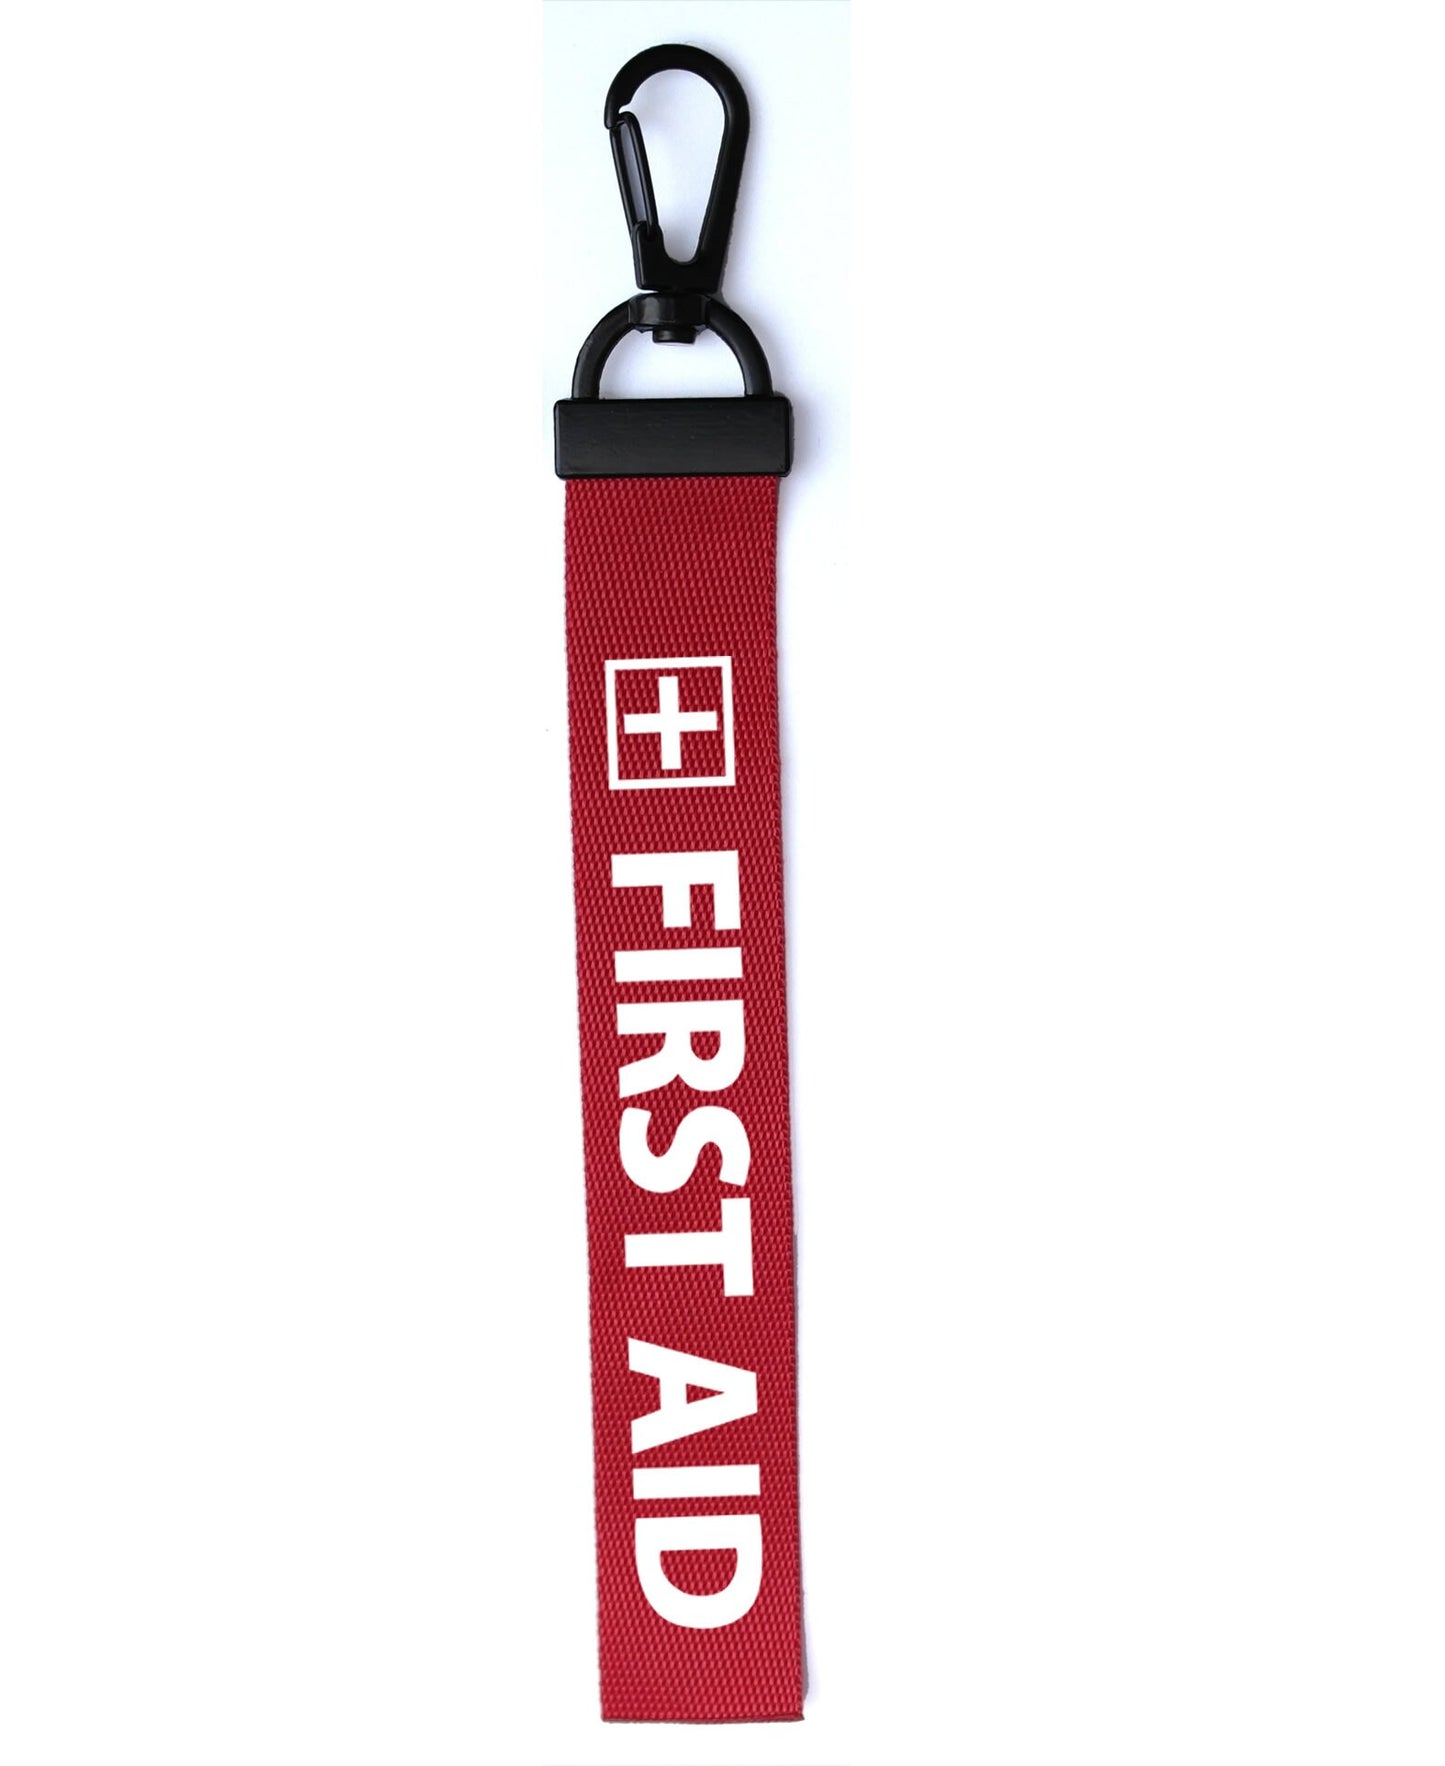 FIRST AID Key Chain Key ring Luggage Personalised Name Text Tag Zipper Pull